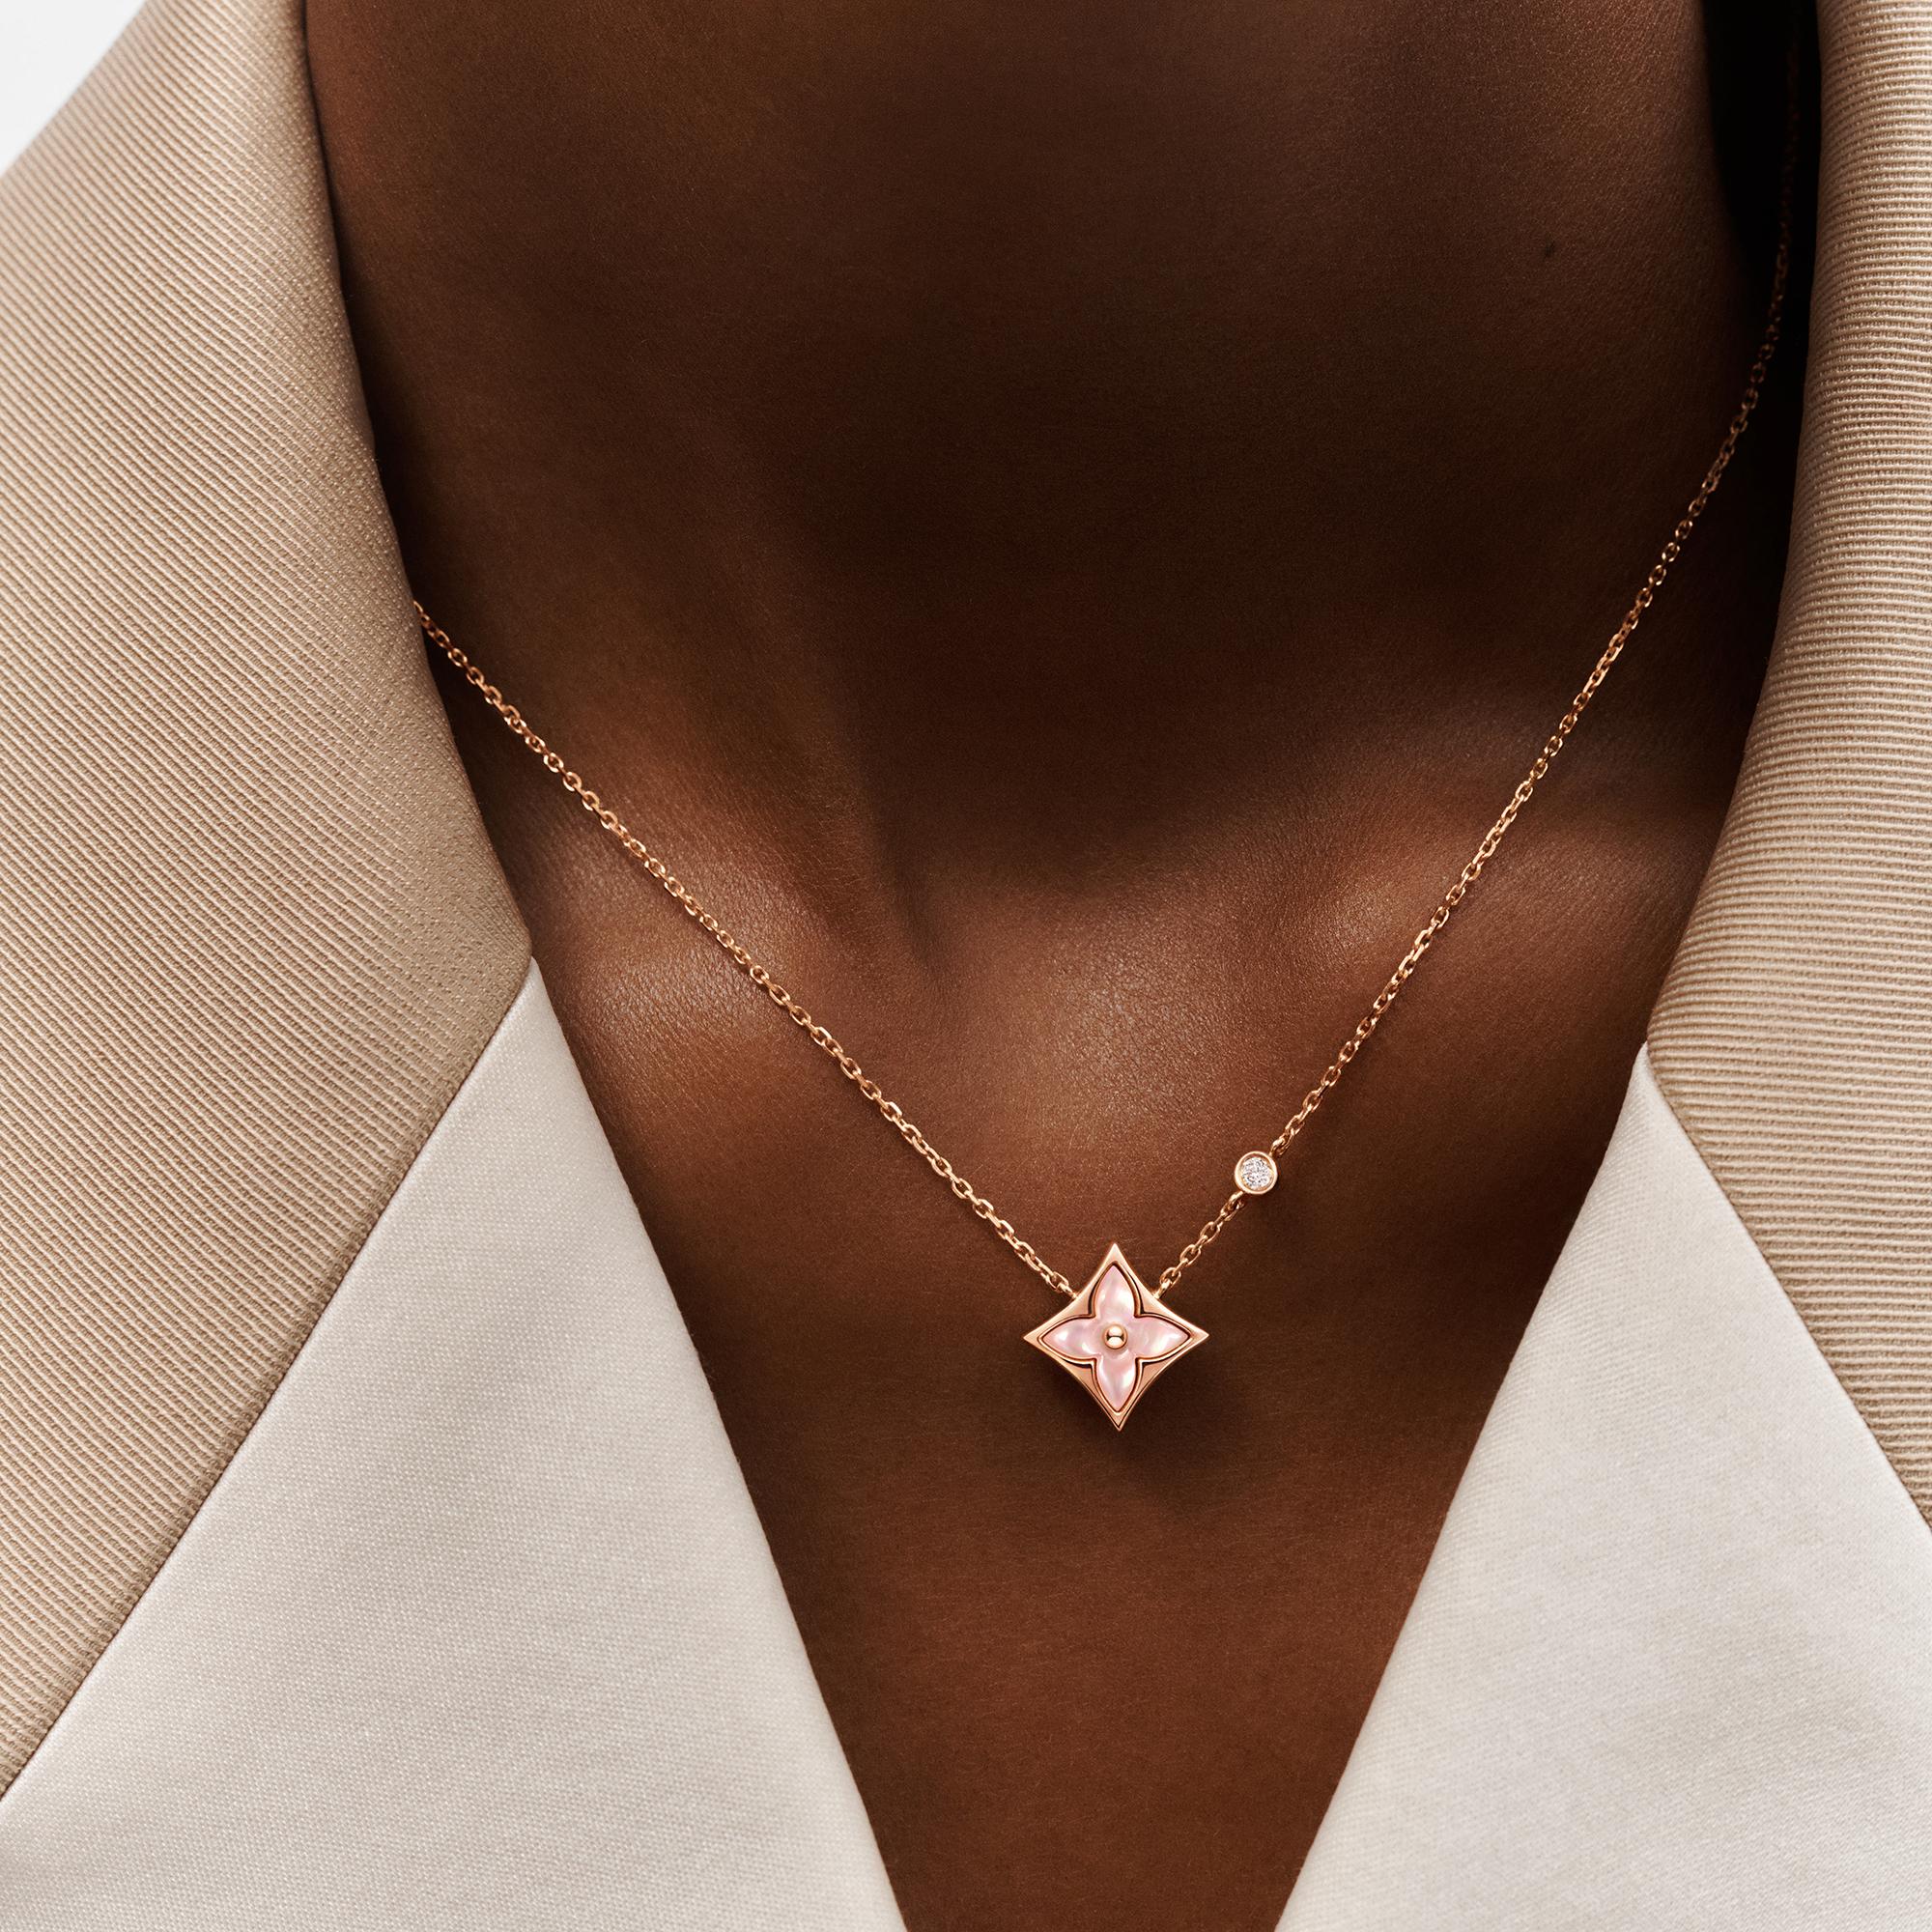 Louis Vuitton Color Blossom BB Star Pendant, Pink gold, Pink Mother-of-Pearl and diamond – Jewelry – Categories Q93612